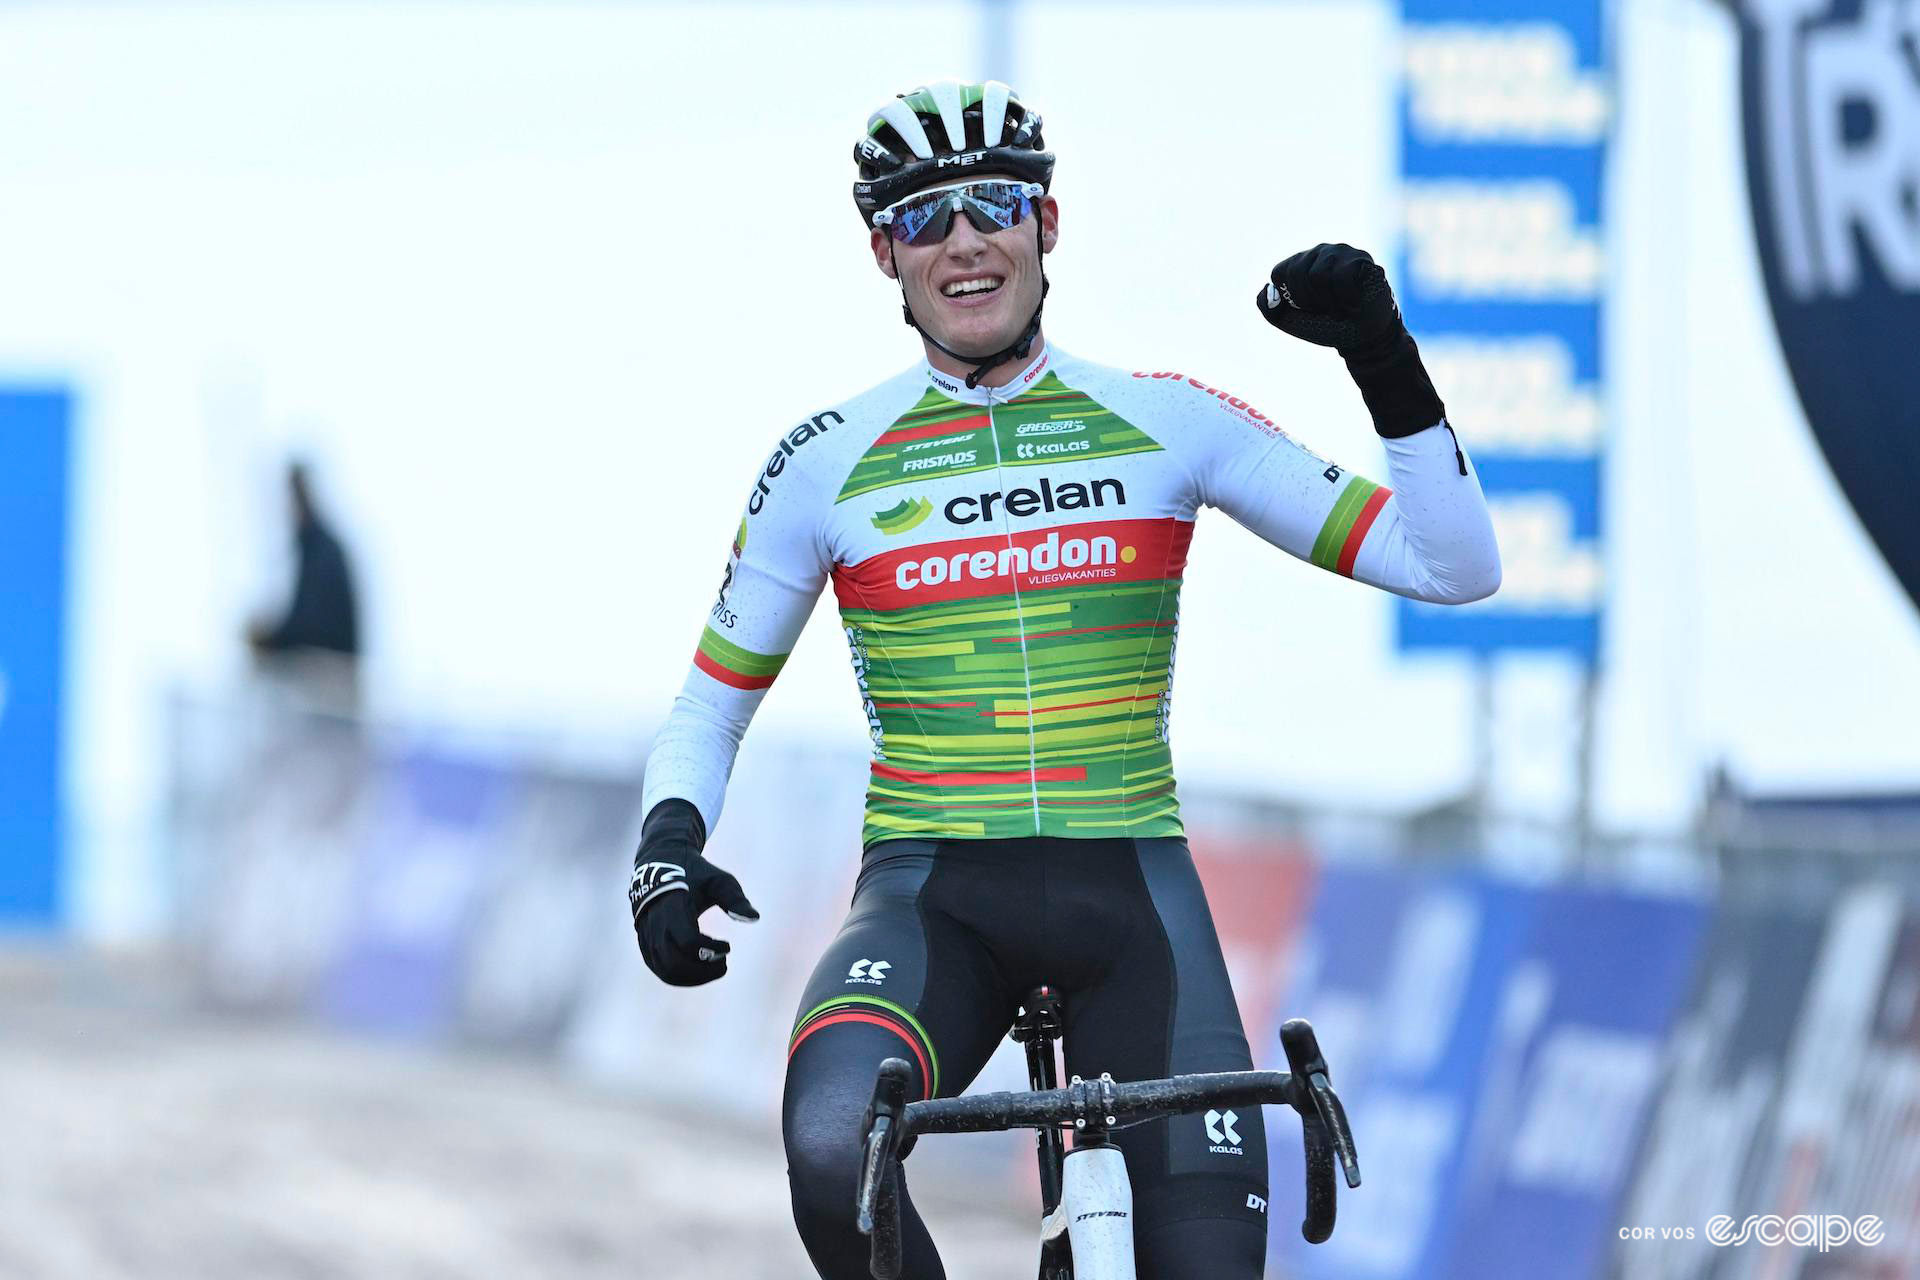 Joran Wyseure celebrates finishing third at UCI Cyclocross World Cup Val di Sole.